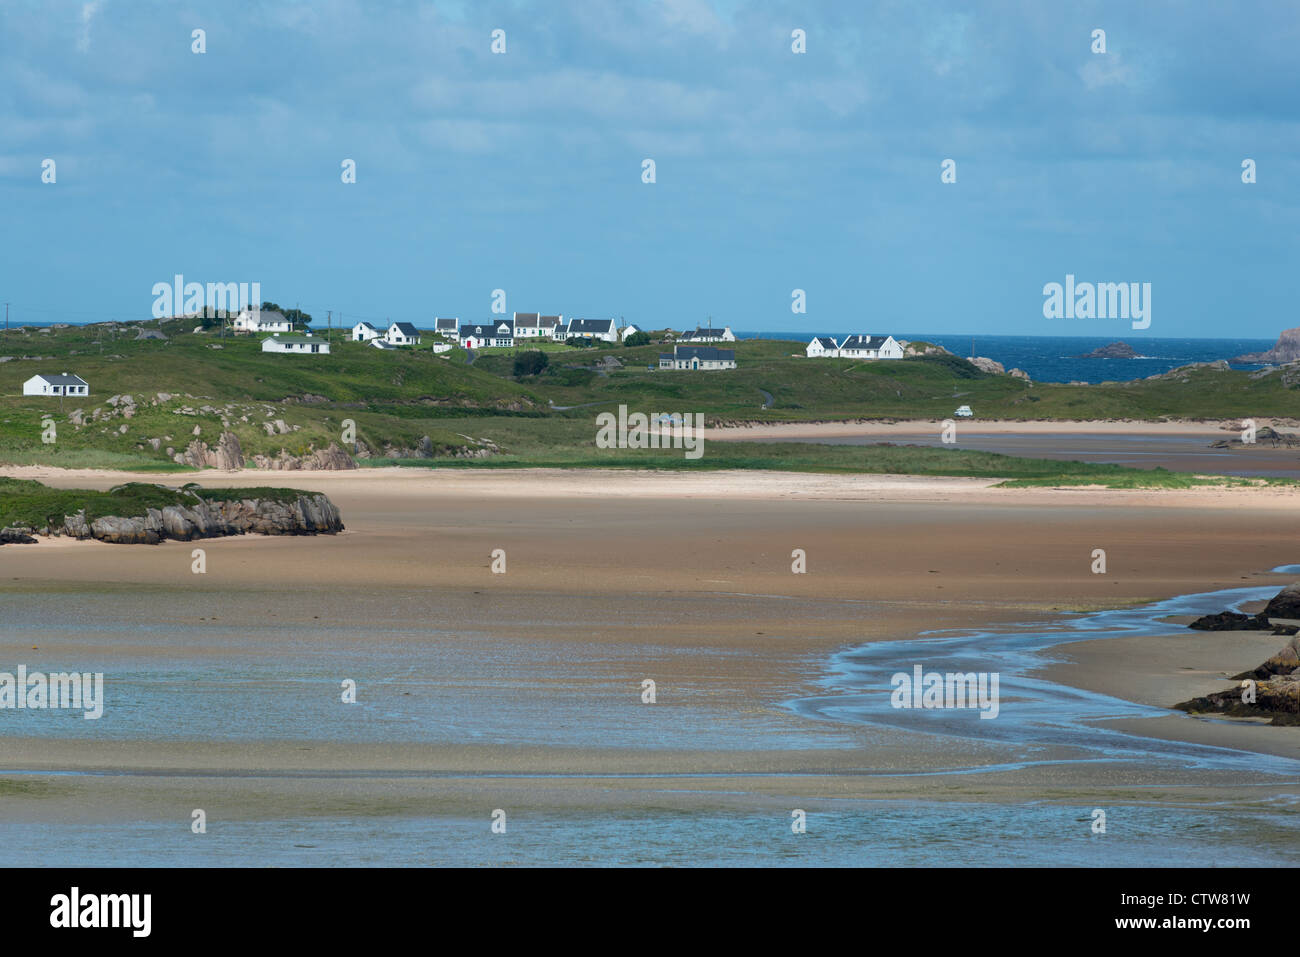 Small islands in the Rosses Bay, County Donegal, Republic of Ireland. Stock Photo